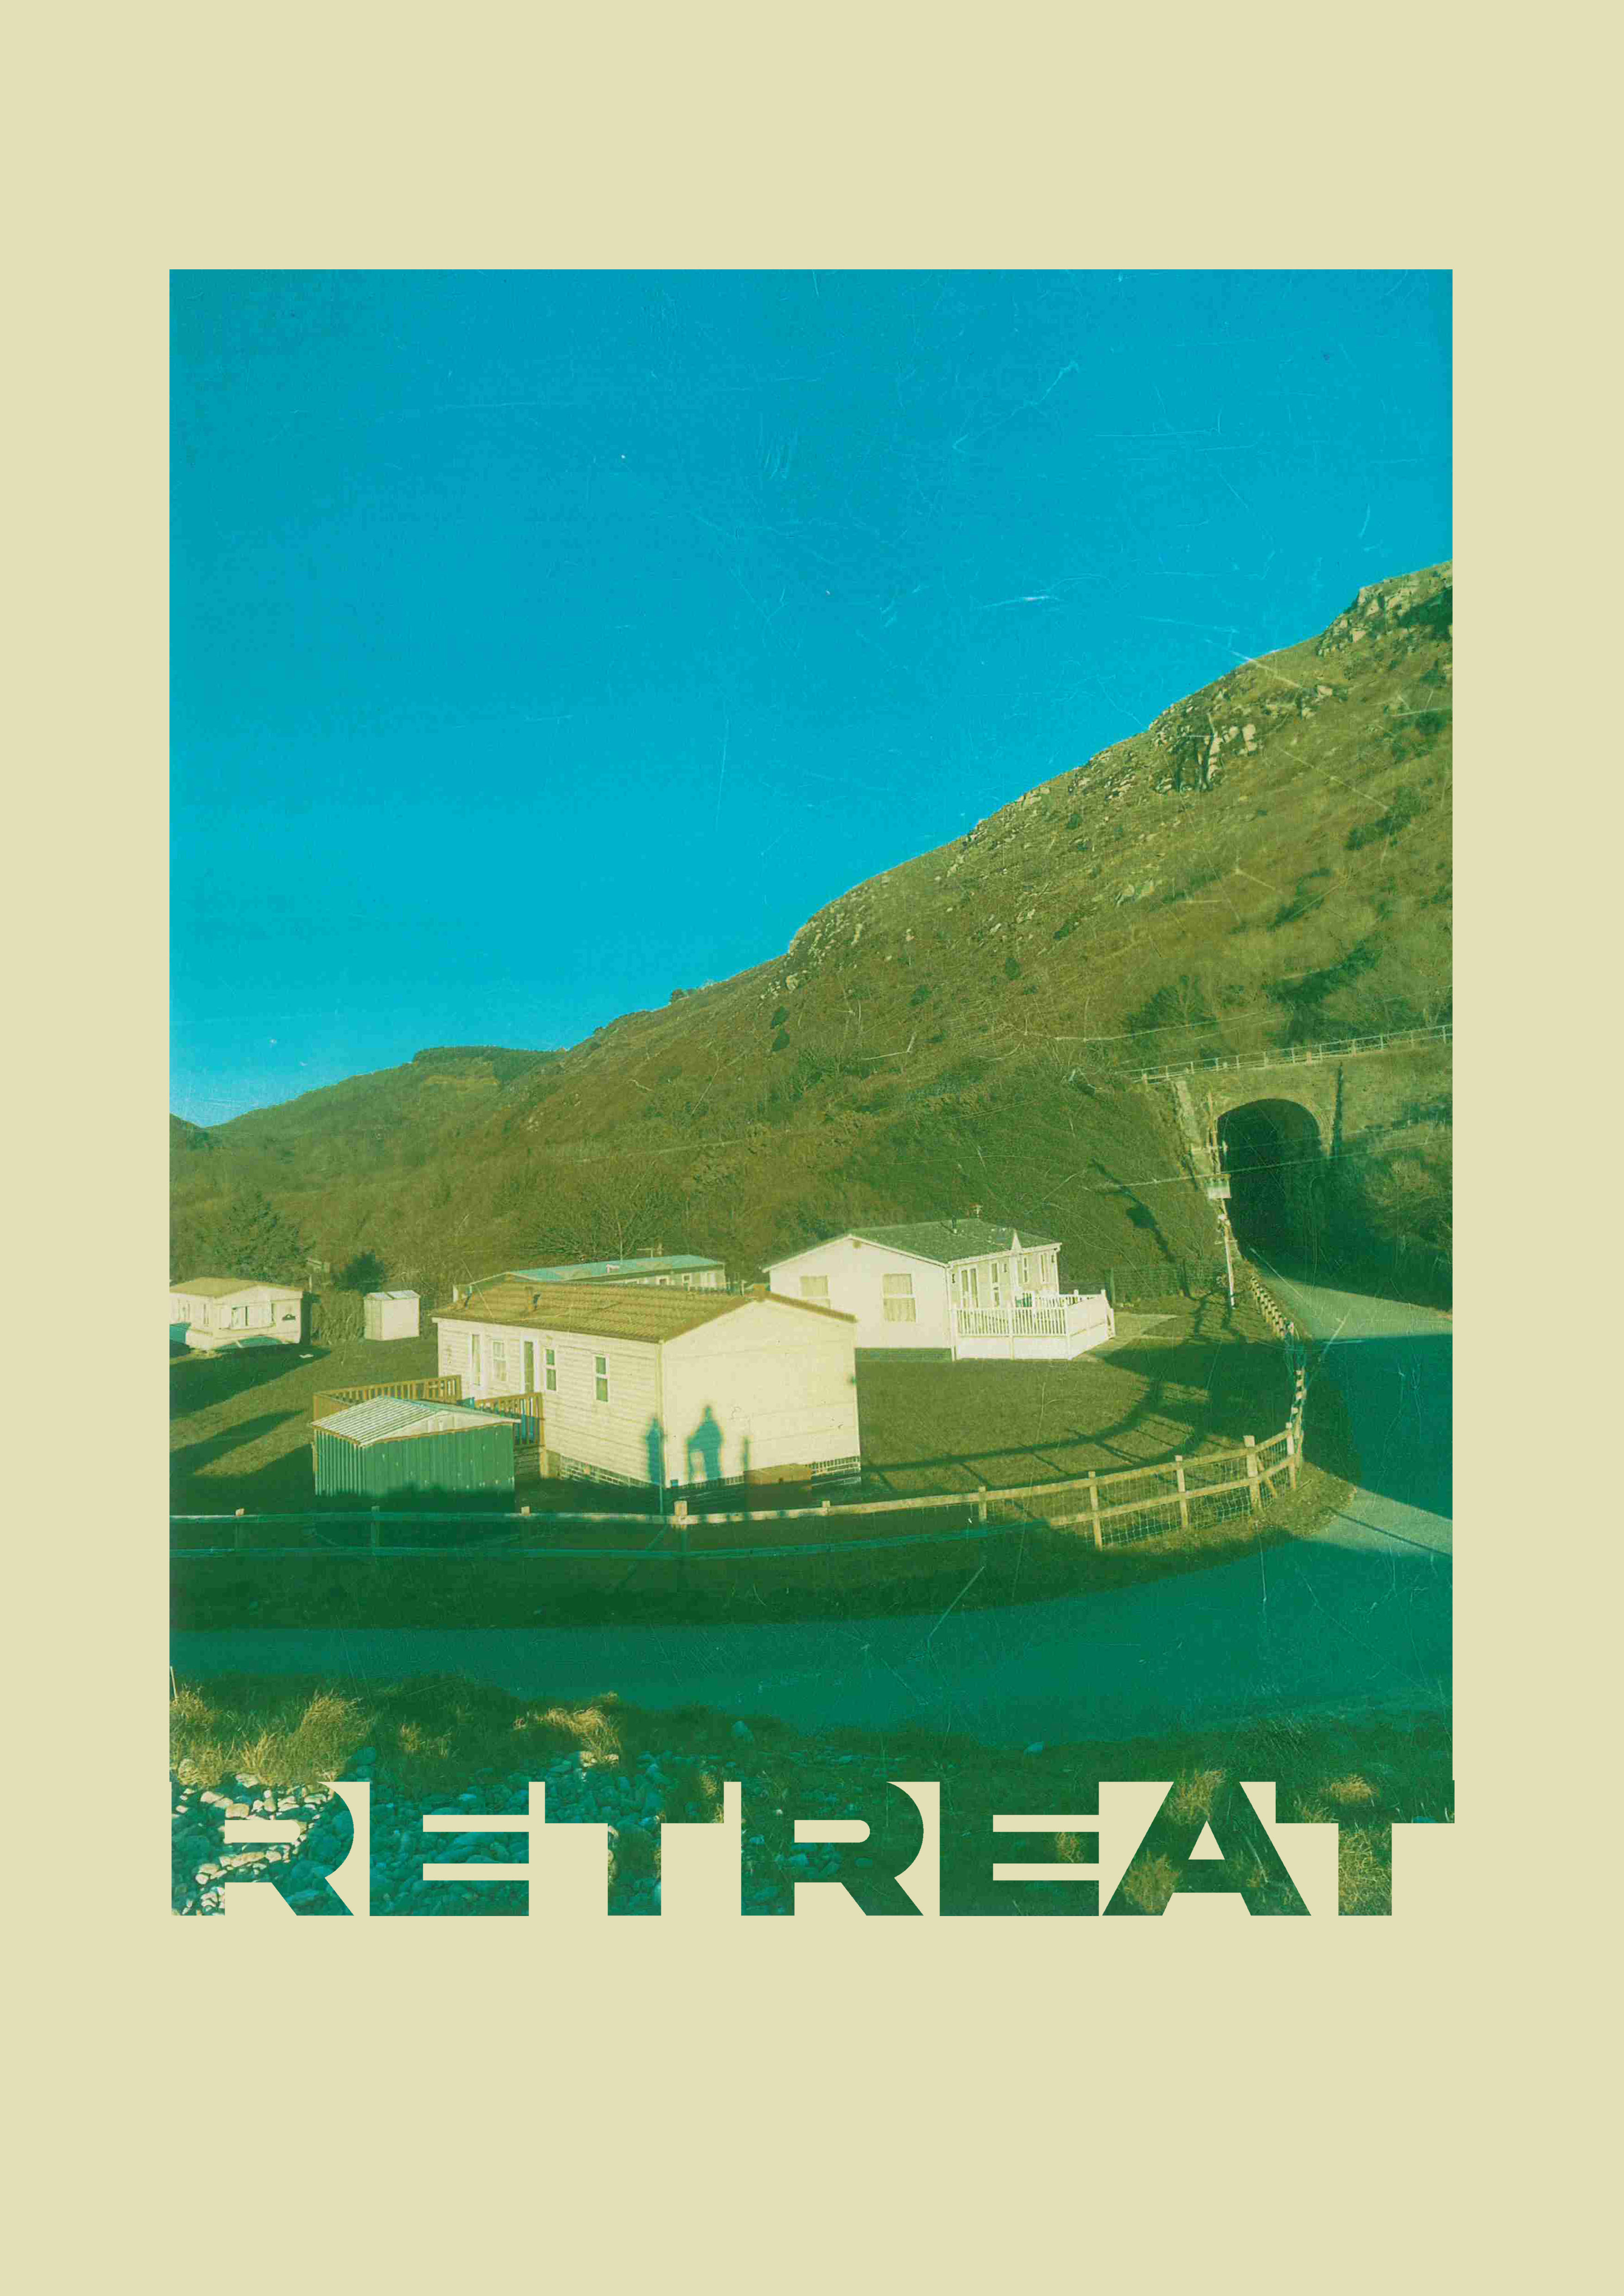 Retreat: the UK's first climate refugees (1.17 MB)